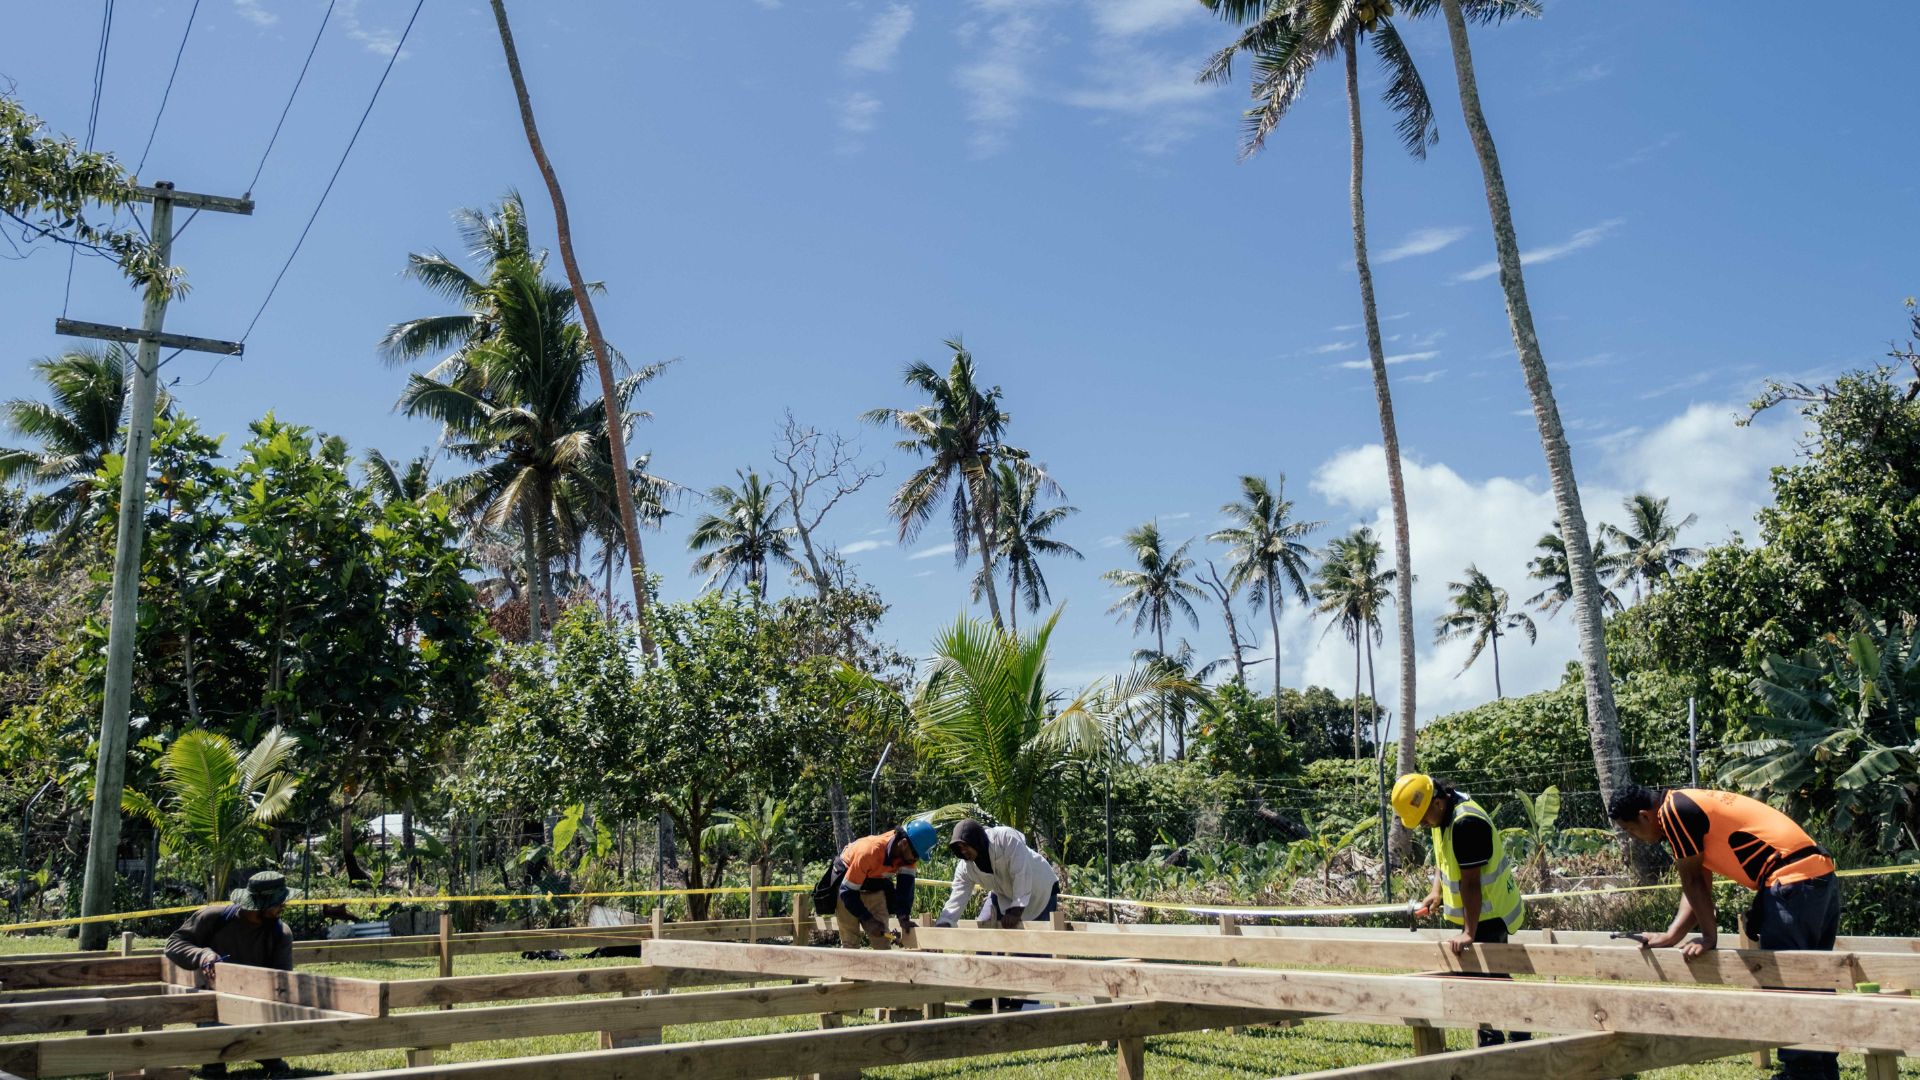 Habitat for Humanity New Zealand undertakes work in the Pacific